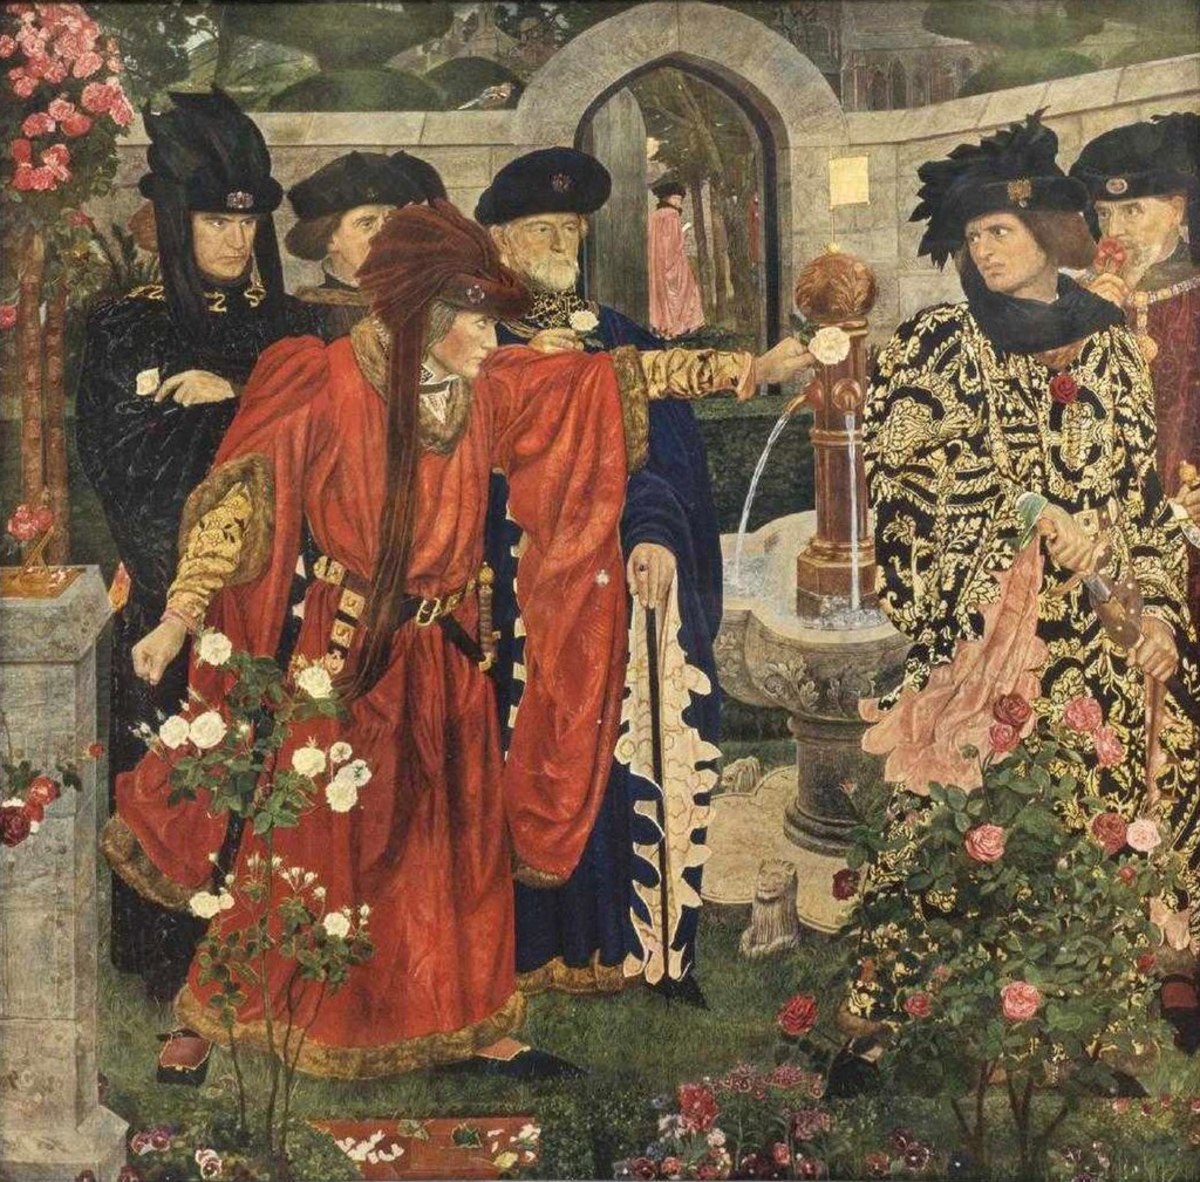 Henry Payne's painting depicts the scene from Shakespeare's "Henry VI" where the lords of England declare their allegiance to the red or white rose.